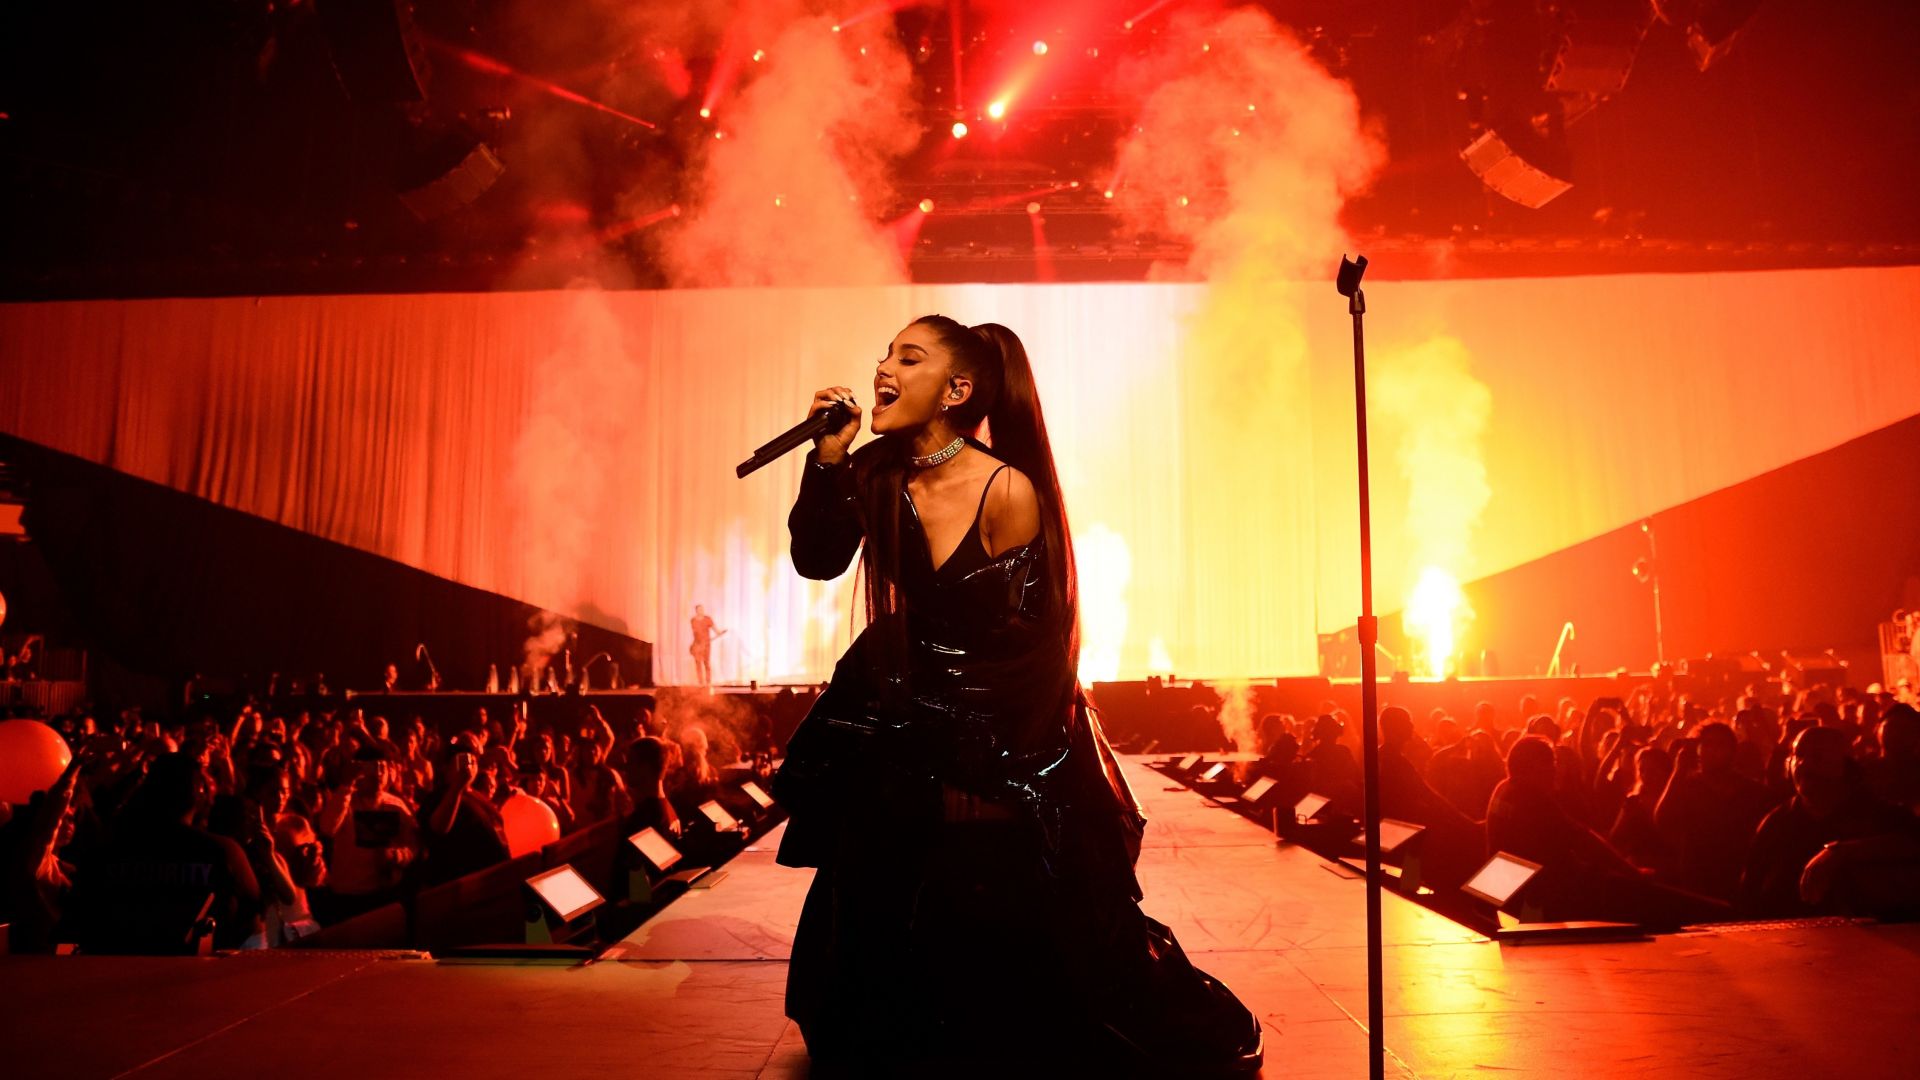 Wallpaper Ariana grande, live performance on stage, singing, 4k